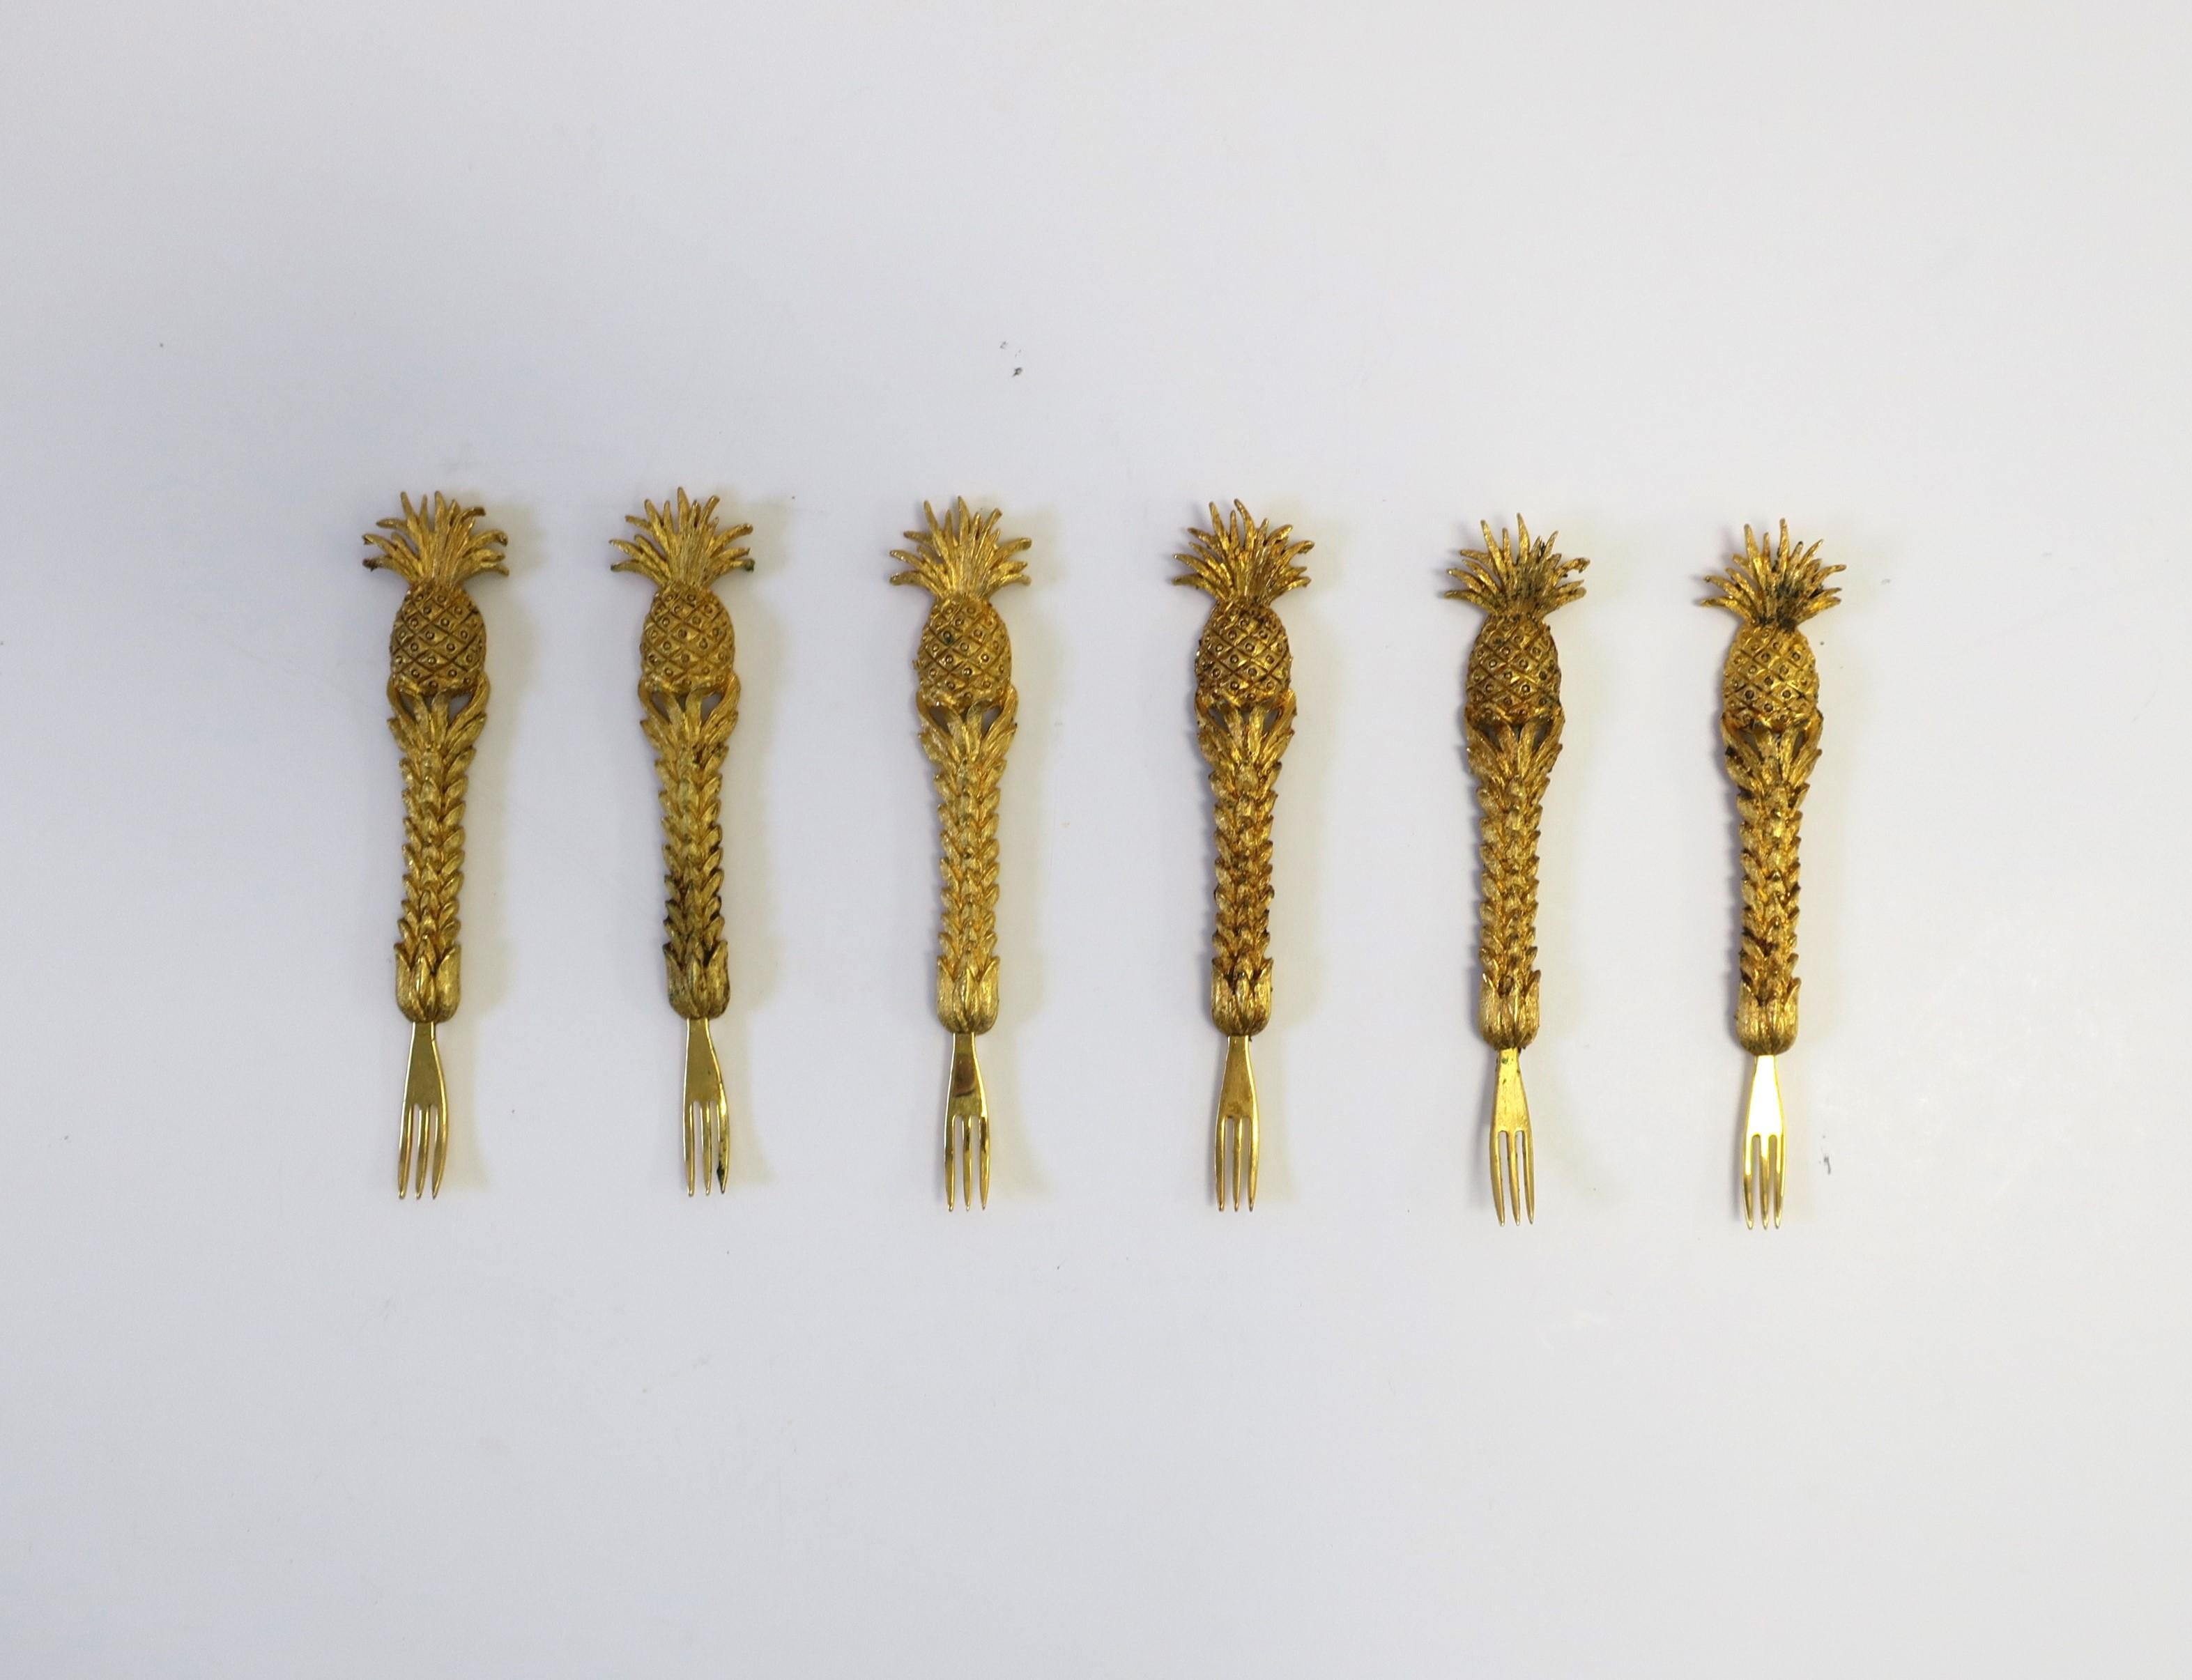 Gold Plated Appetizer Canapé Hor D'oeuvres Forks with Pineapple Design, 1960s For Sale 3